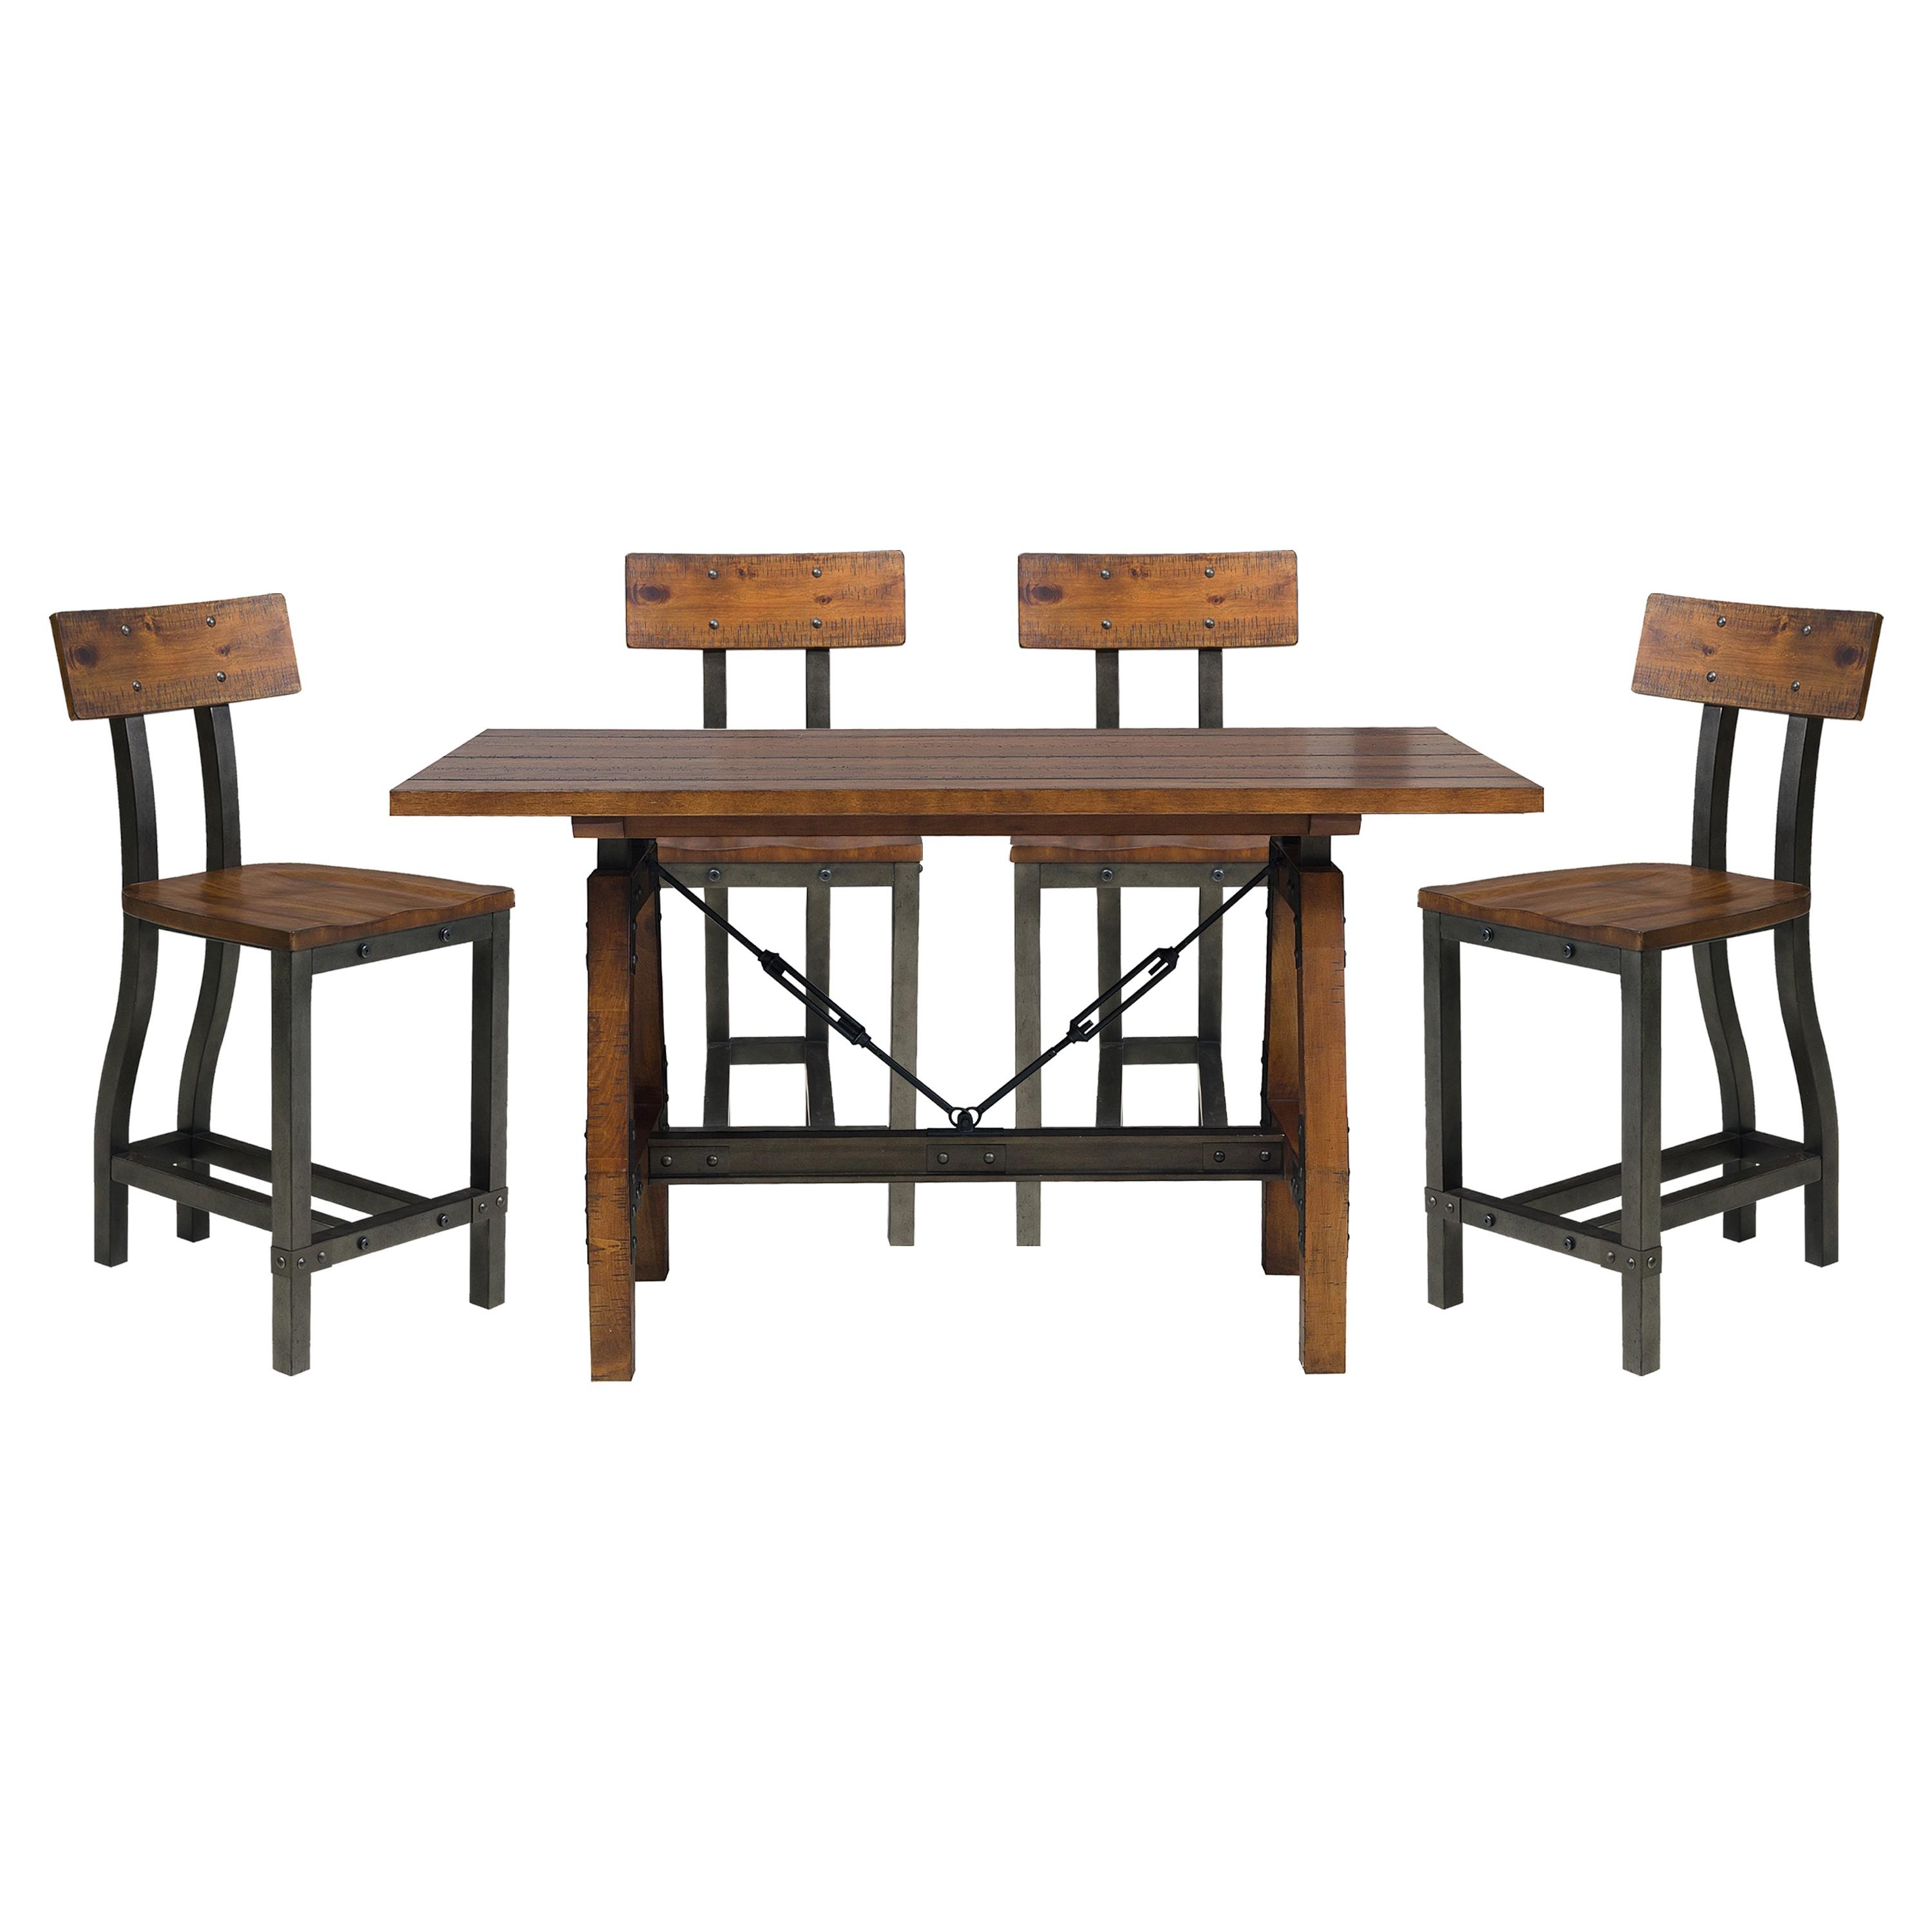 Modern Dining Room Set 1715-36*5PC Holverson 1715-36*5PC in Rustic Brown 